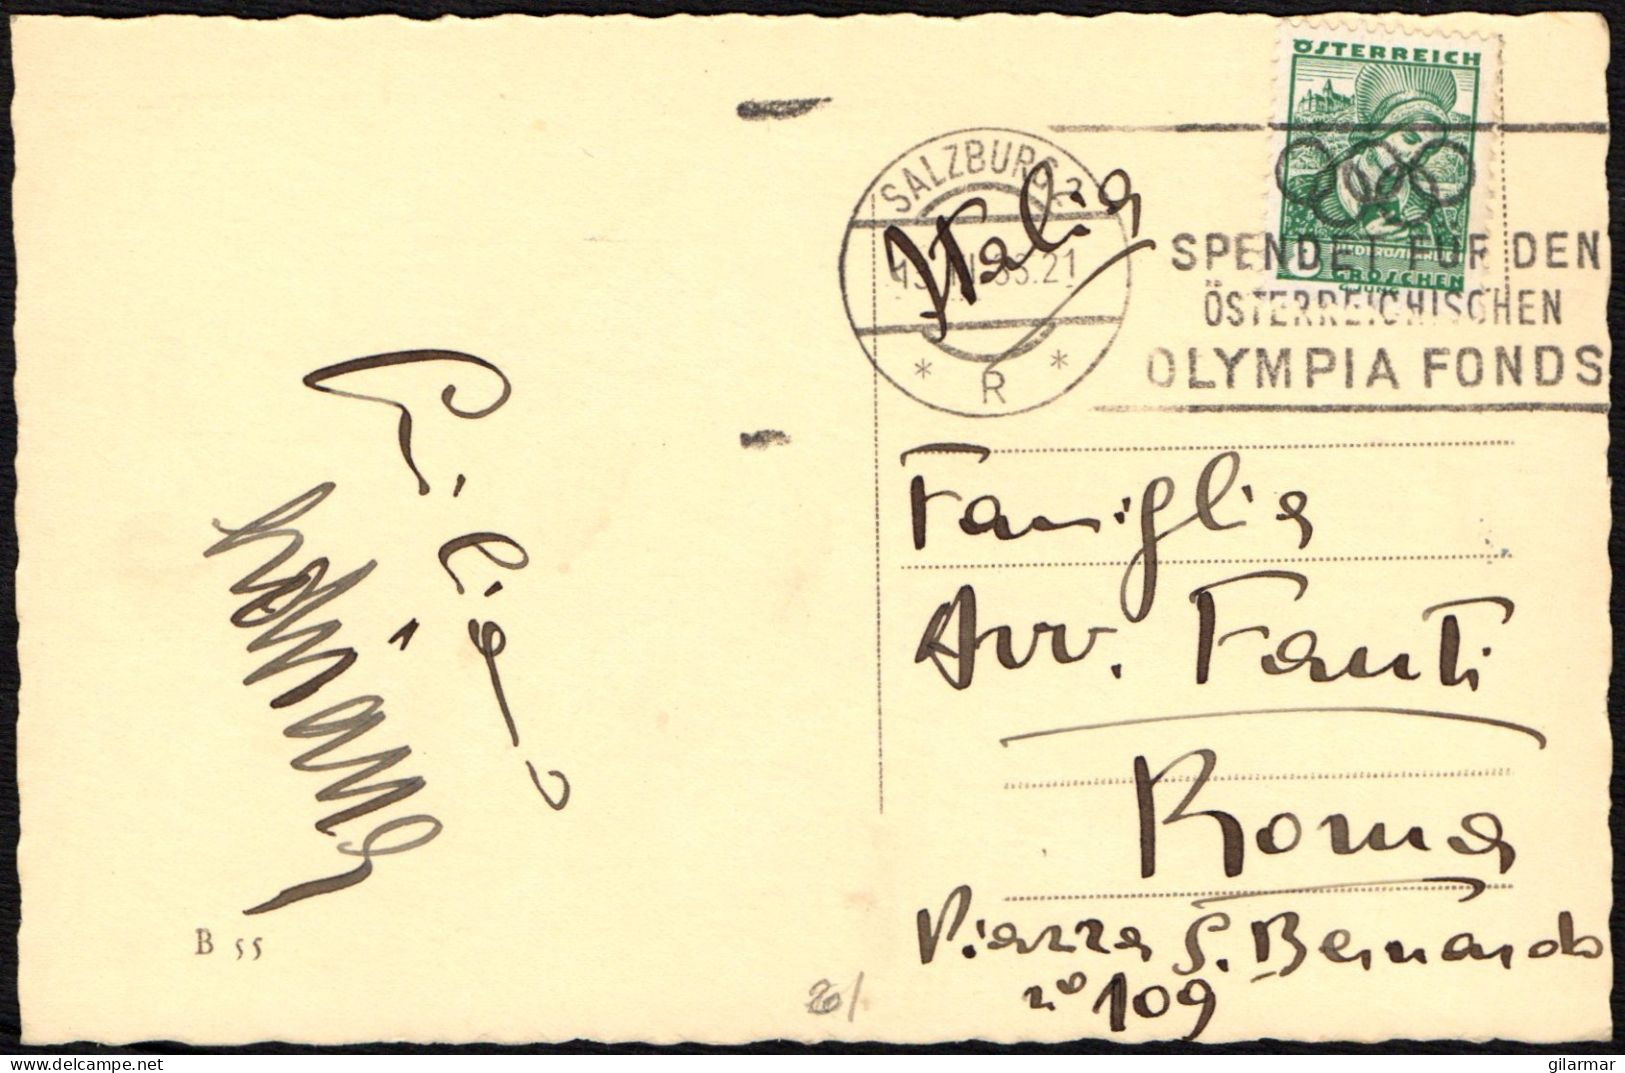 OLYMPIC GAMES 1936 - AUSTRIA SALZBURG 1935 - DONATE TO THE AUSTRIAN OLYMPIC FUND - MAILED POSTCARD - M - Estate 1936: Berlino